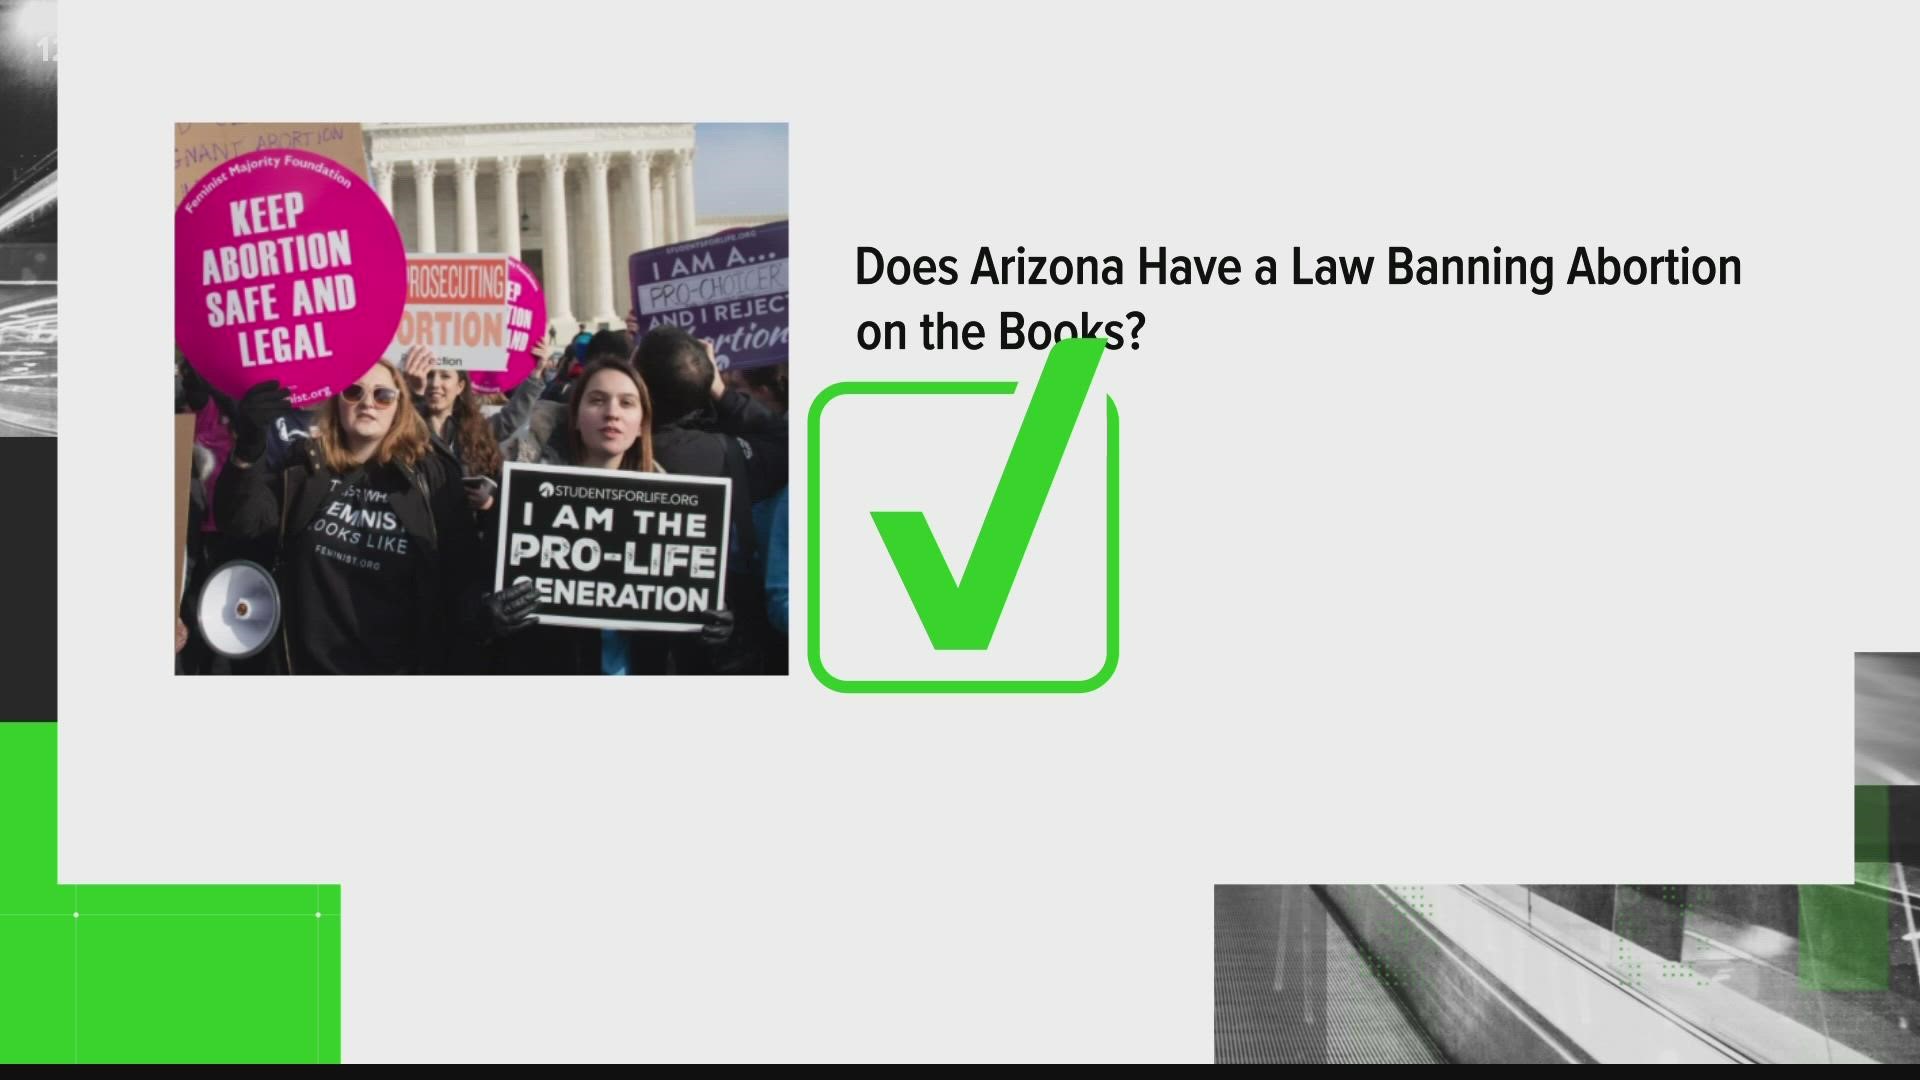 The Supreme Court heard a Mississippi case that could undercut Roe v. Wade this week. We're verifying whether Arizona has an abortion ban on the books.